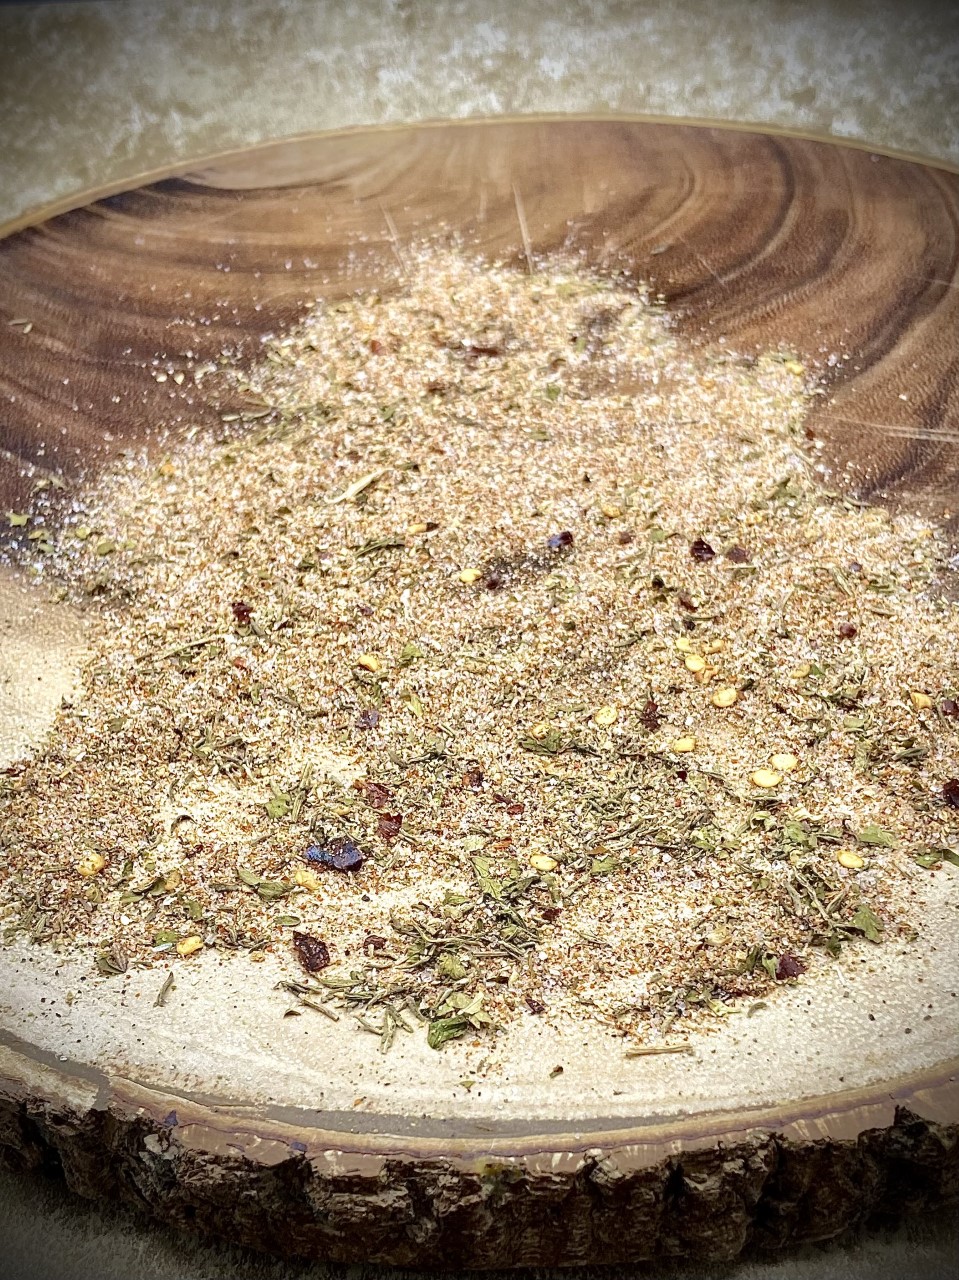 How to Make Your Own Jerk Rub Seasoning from Scratch for Beef, Chicken, or Pork